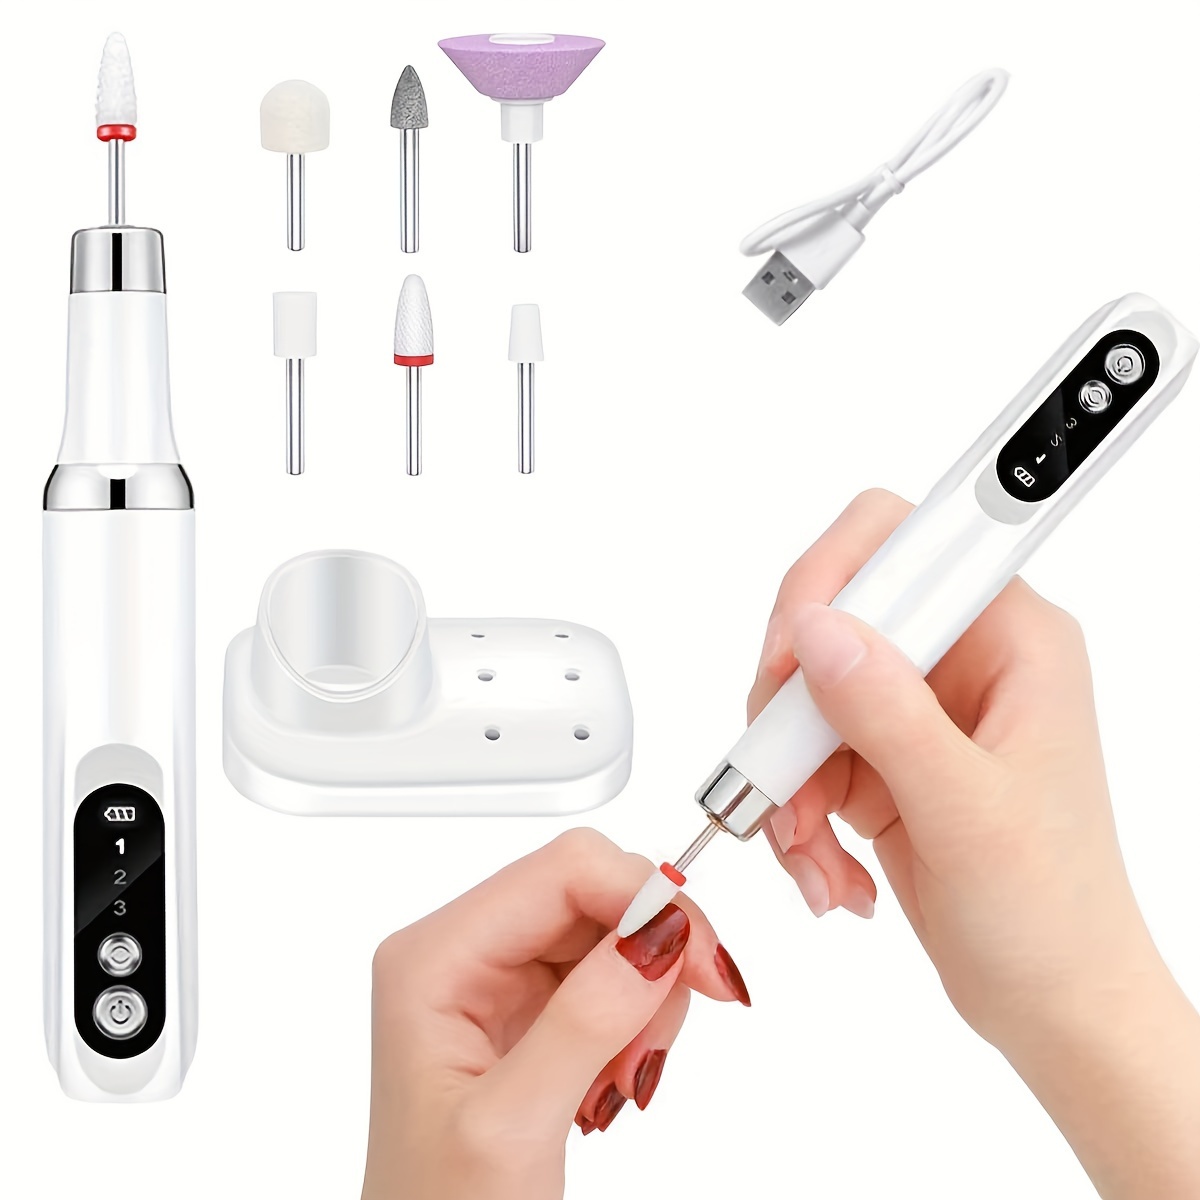 

Electric Nail Drill Set, Hy60 Manicure Machine With 6 Grinding Heads, Portable Rechargeable Nail File Kit With Led Display For Exfoliation, Polishing, Nail Care